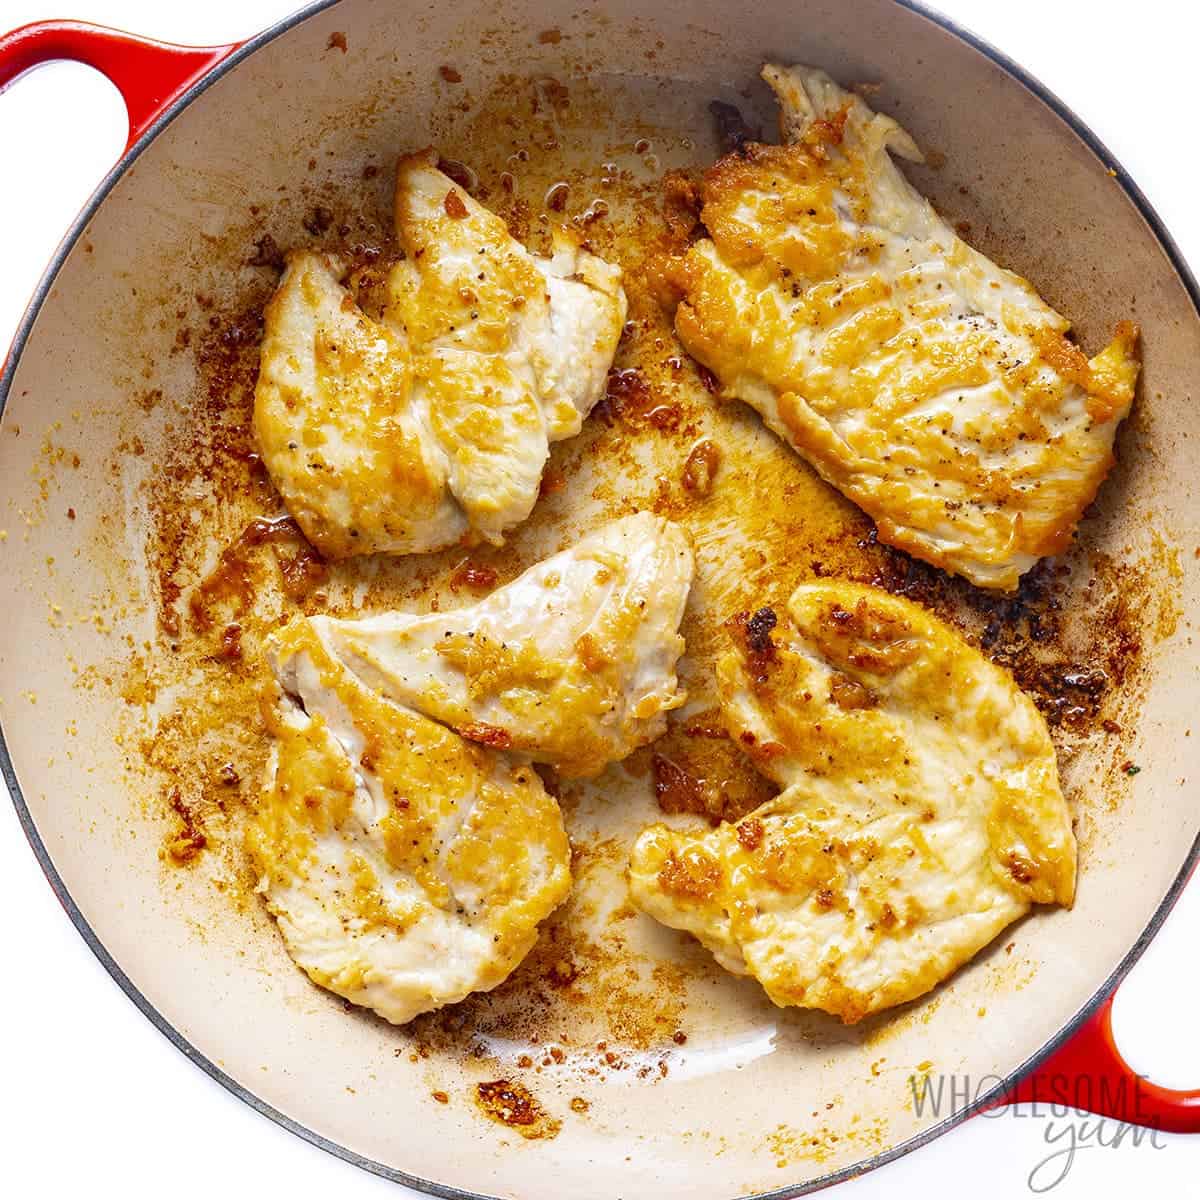 Chicken chops are fried in a pan.